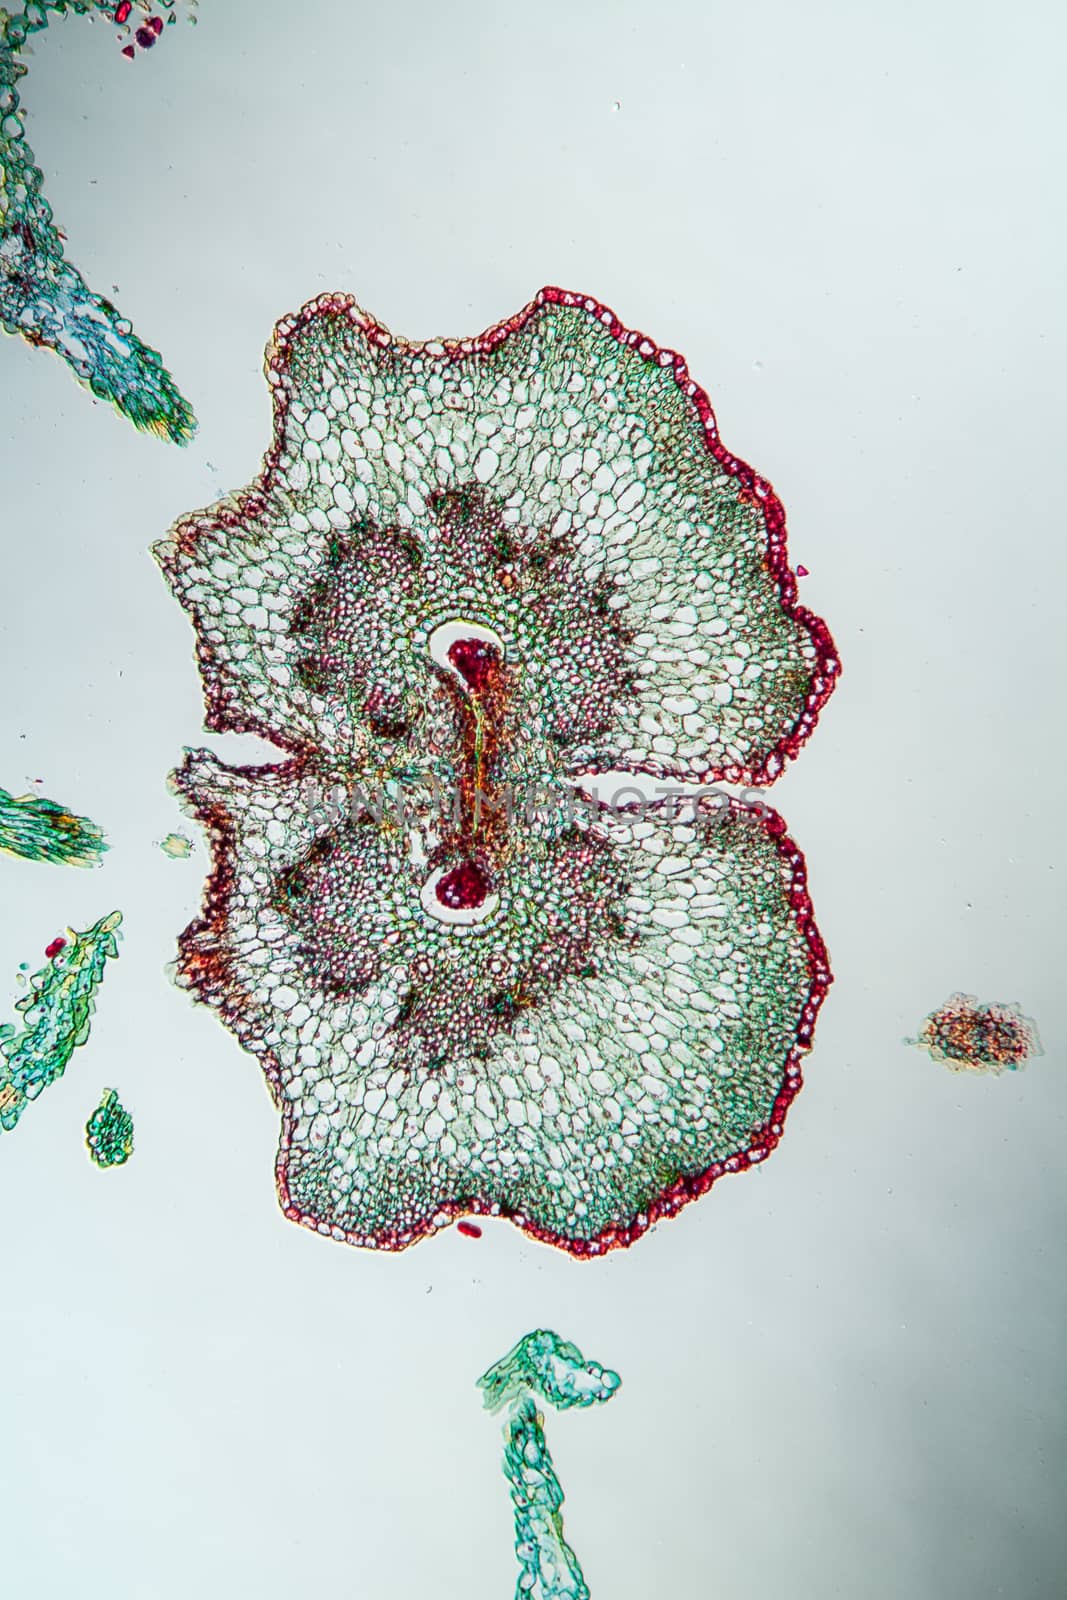 Yarrow flowers under the microscope across 100x by Dr-Lange